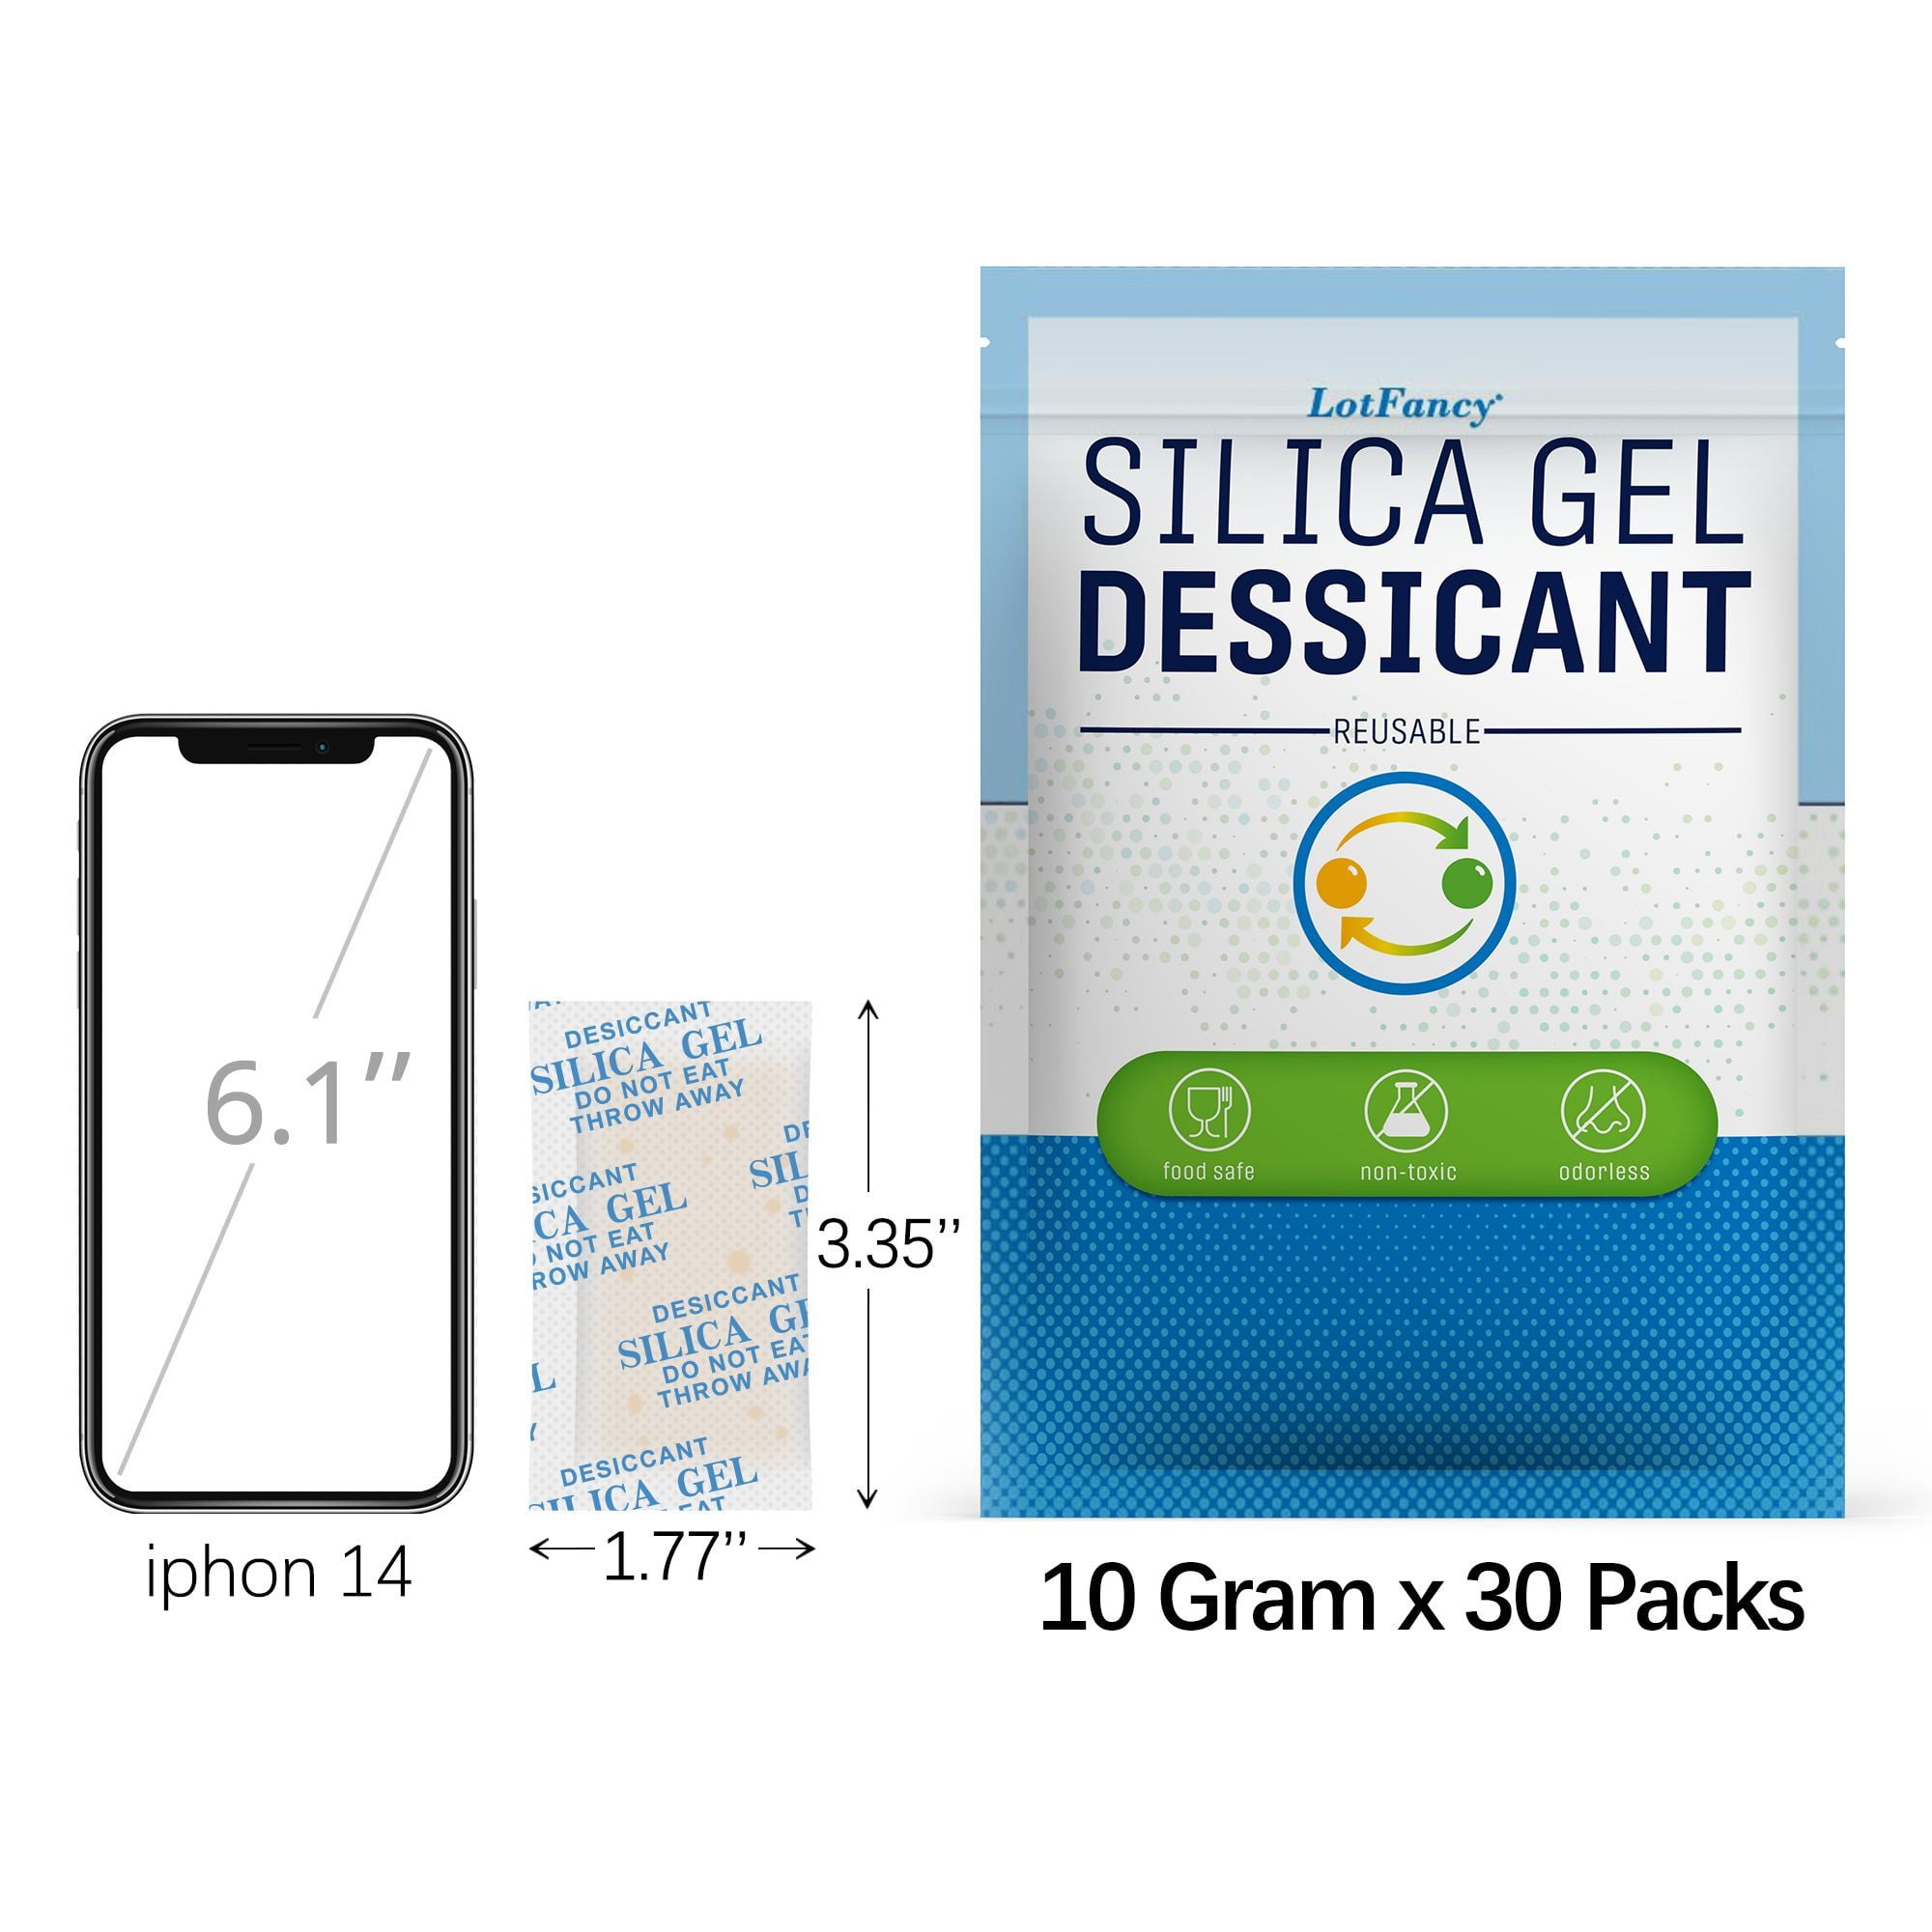 LotFancy 30 Packs 10 Gram Silica Gel Packets, Indicating Desiccant  Dehumidifier 